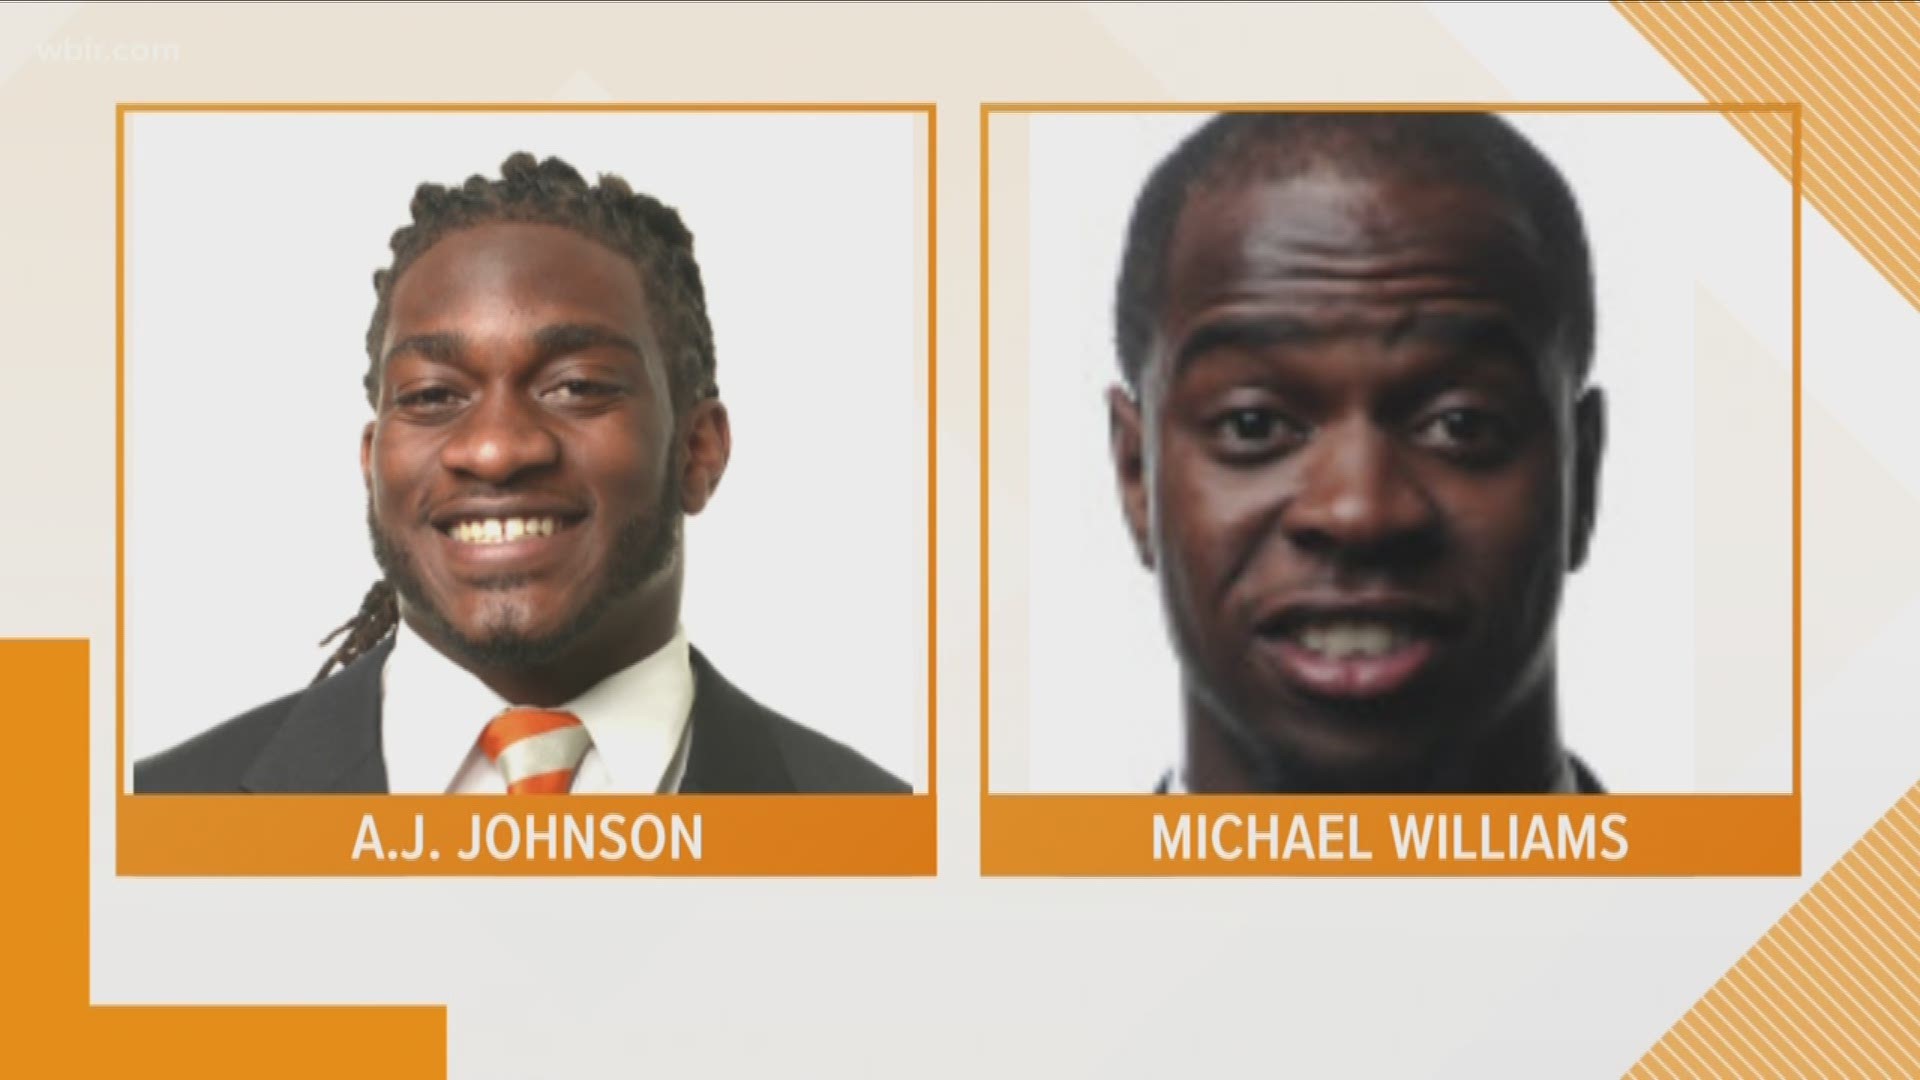 A.J. Johnson and Michael Williams are accused of raping a woman in November 2014.